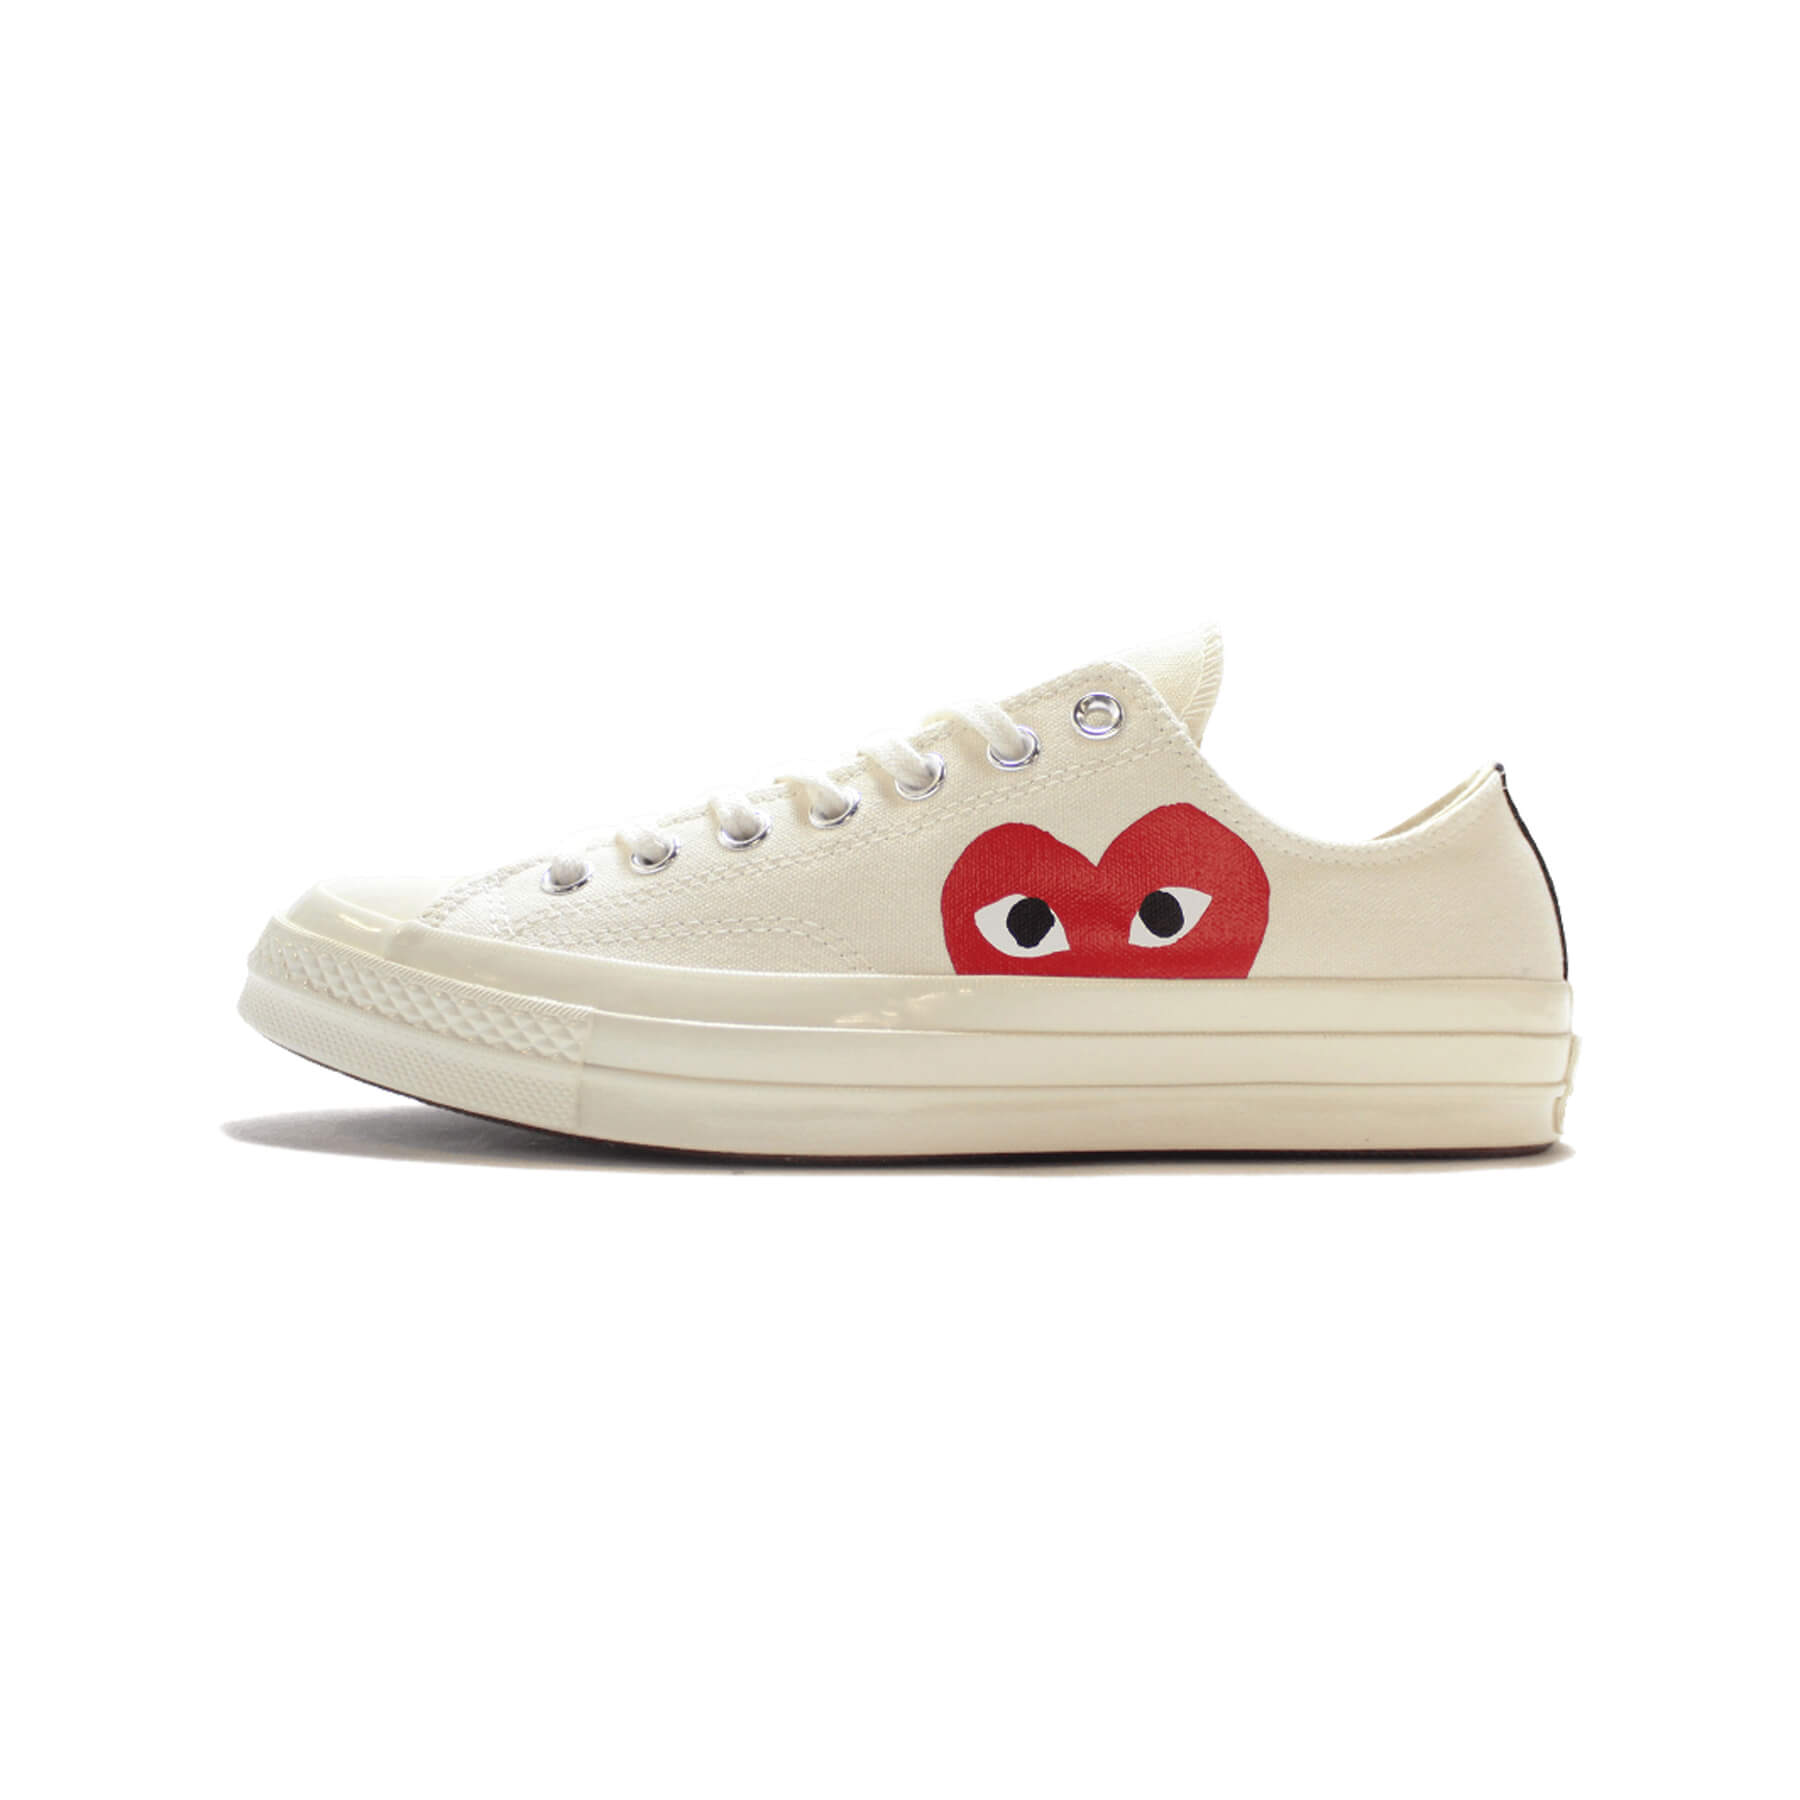 Converse Chuck 70s Ox CDG Play White - Fast Delivery